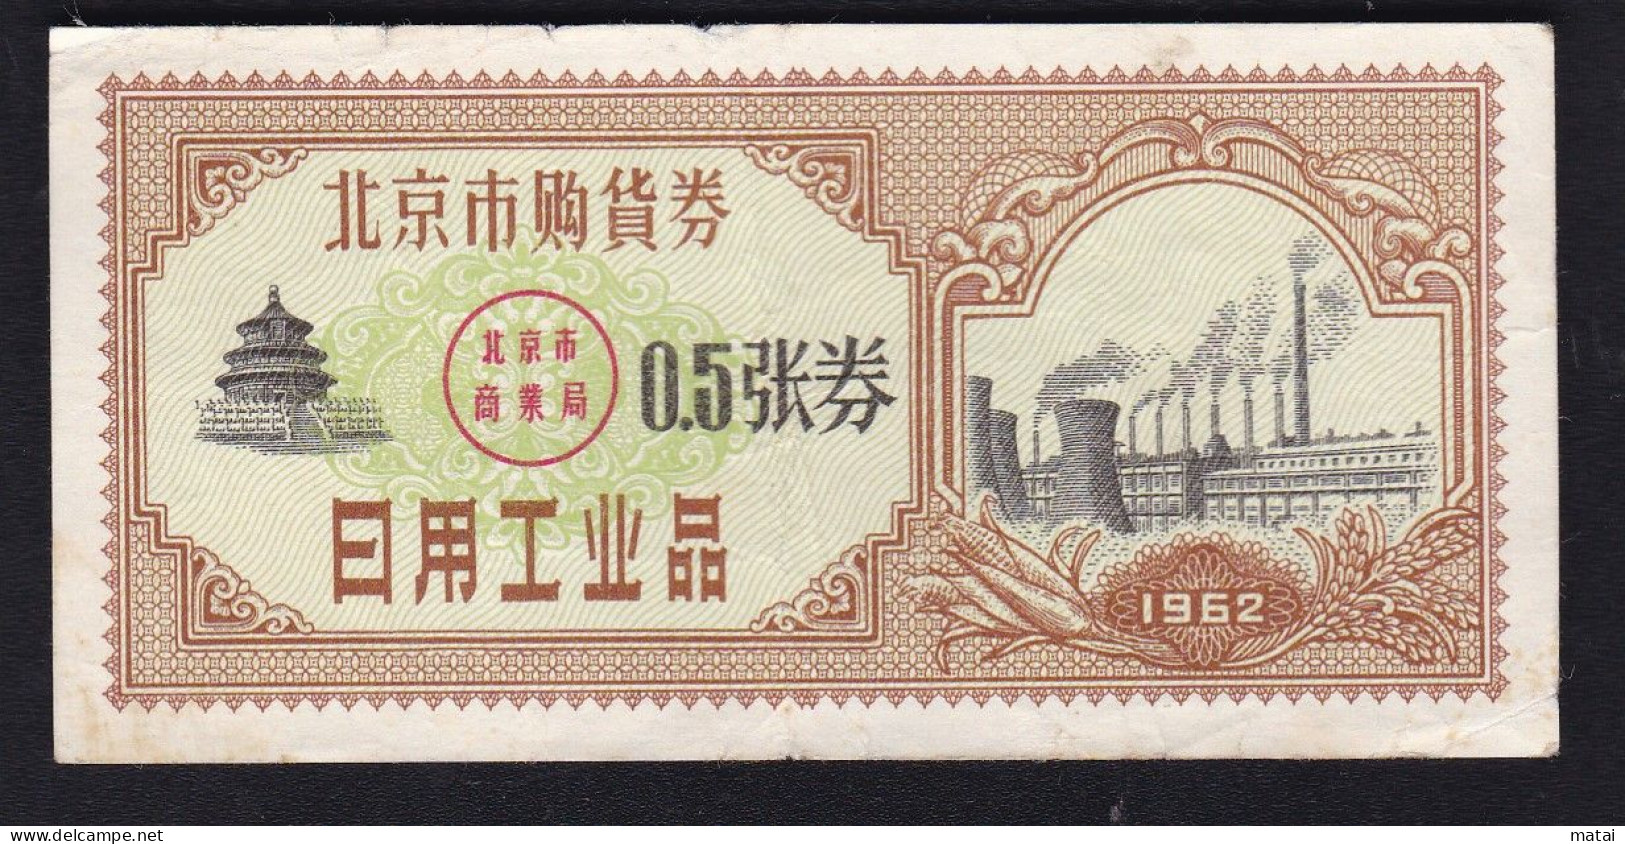 CHINA CHINE 1962 Beijing Purchase Voucher 0.5 Coupon - Tickets - Entradas